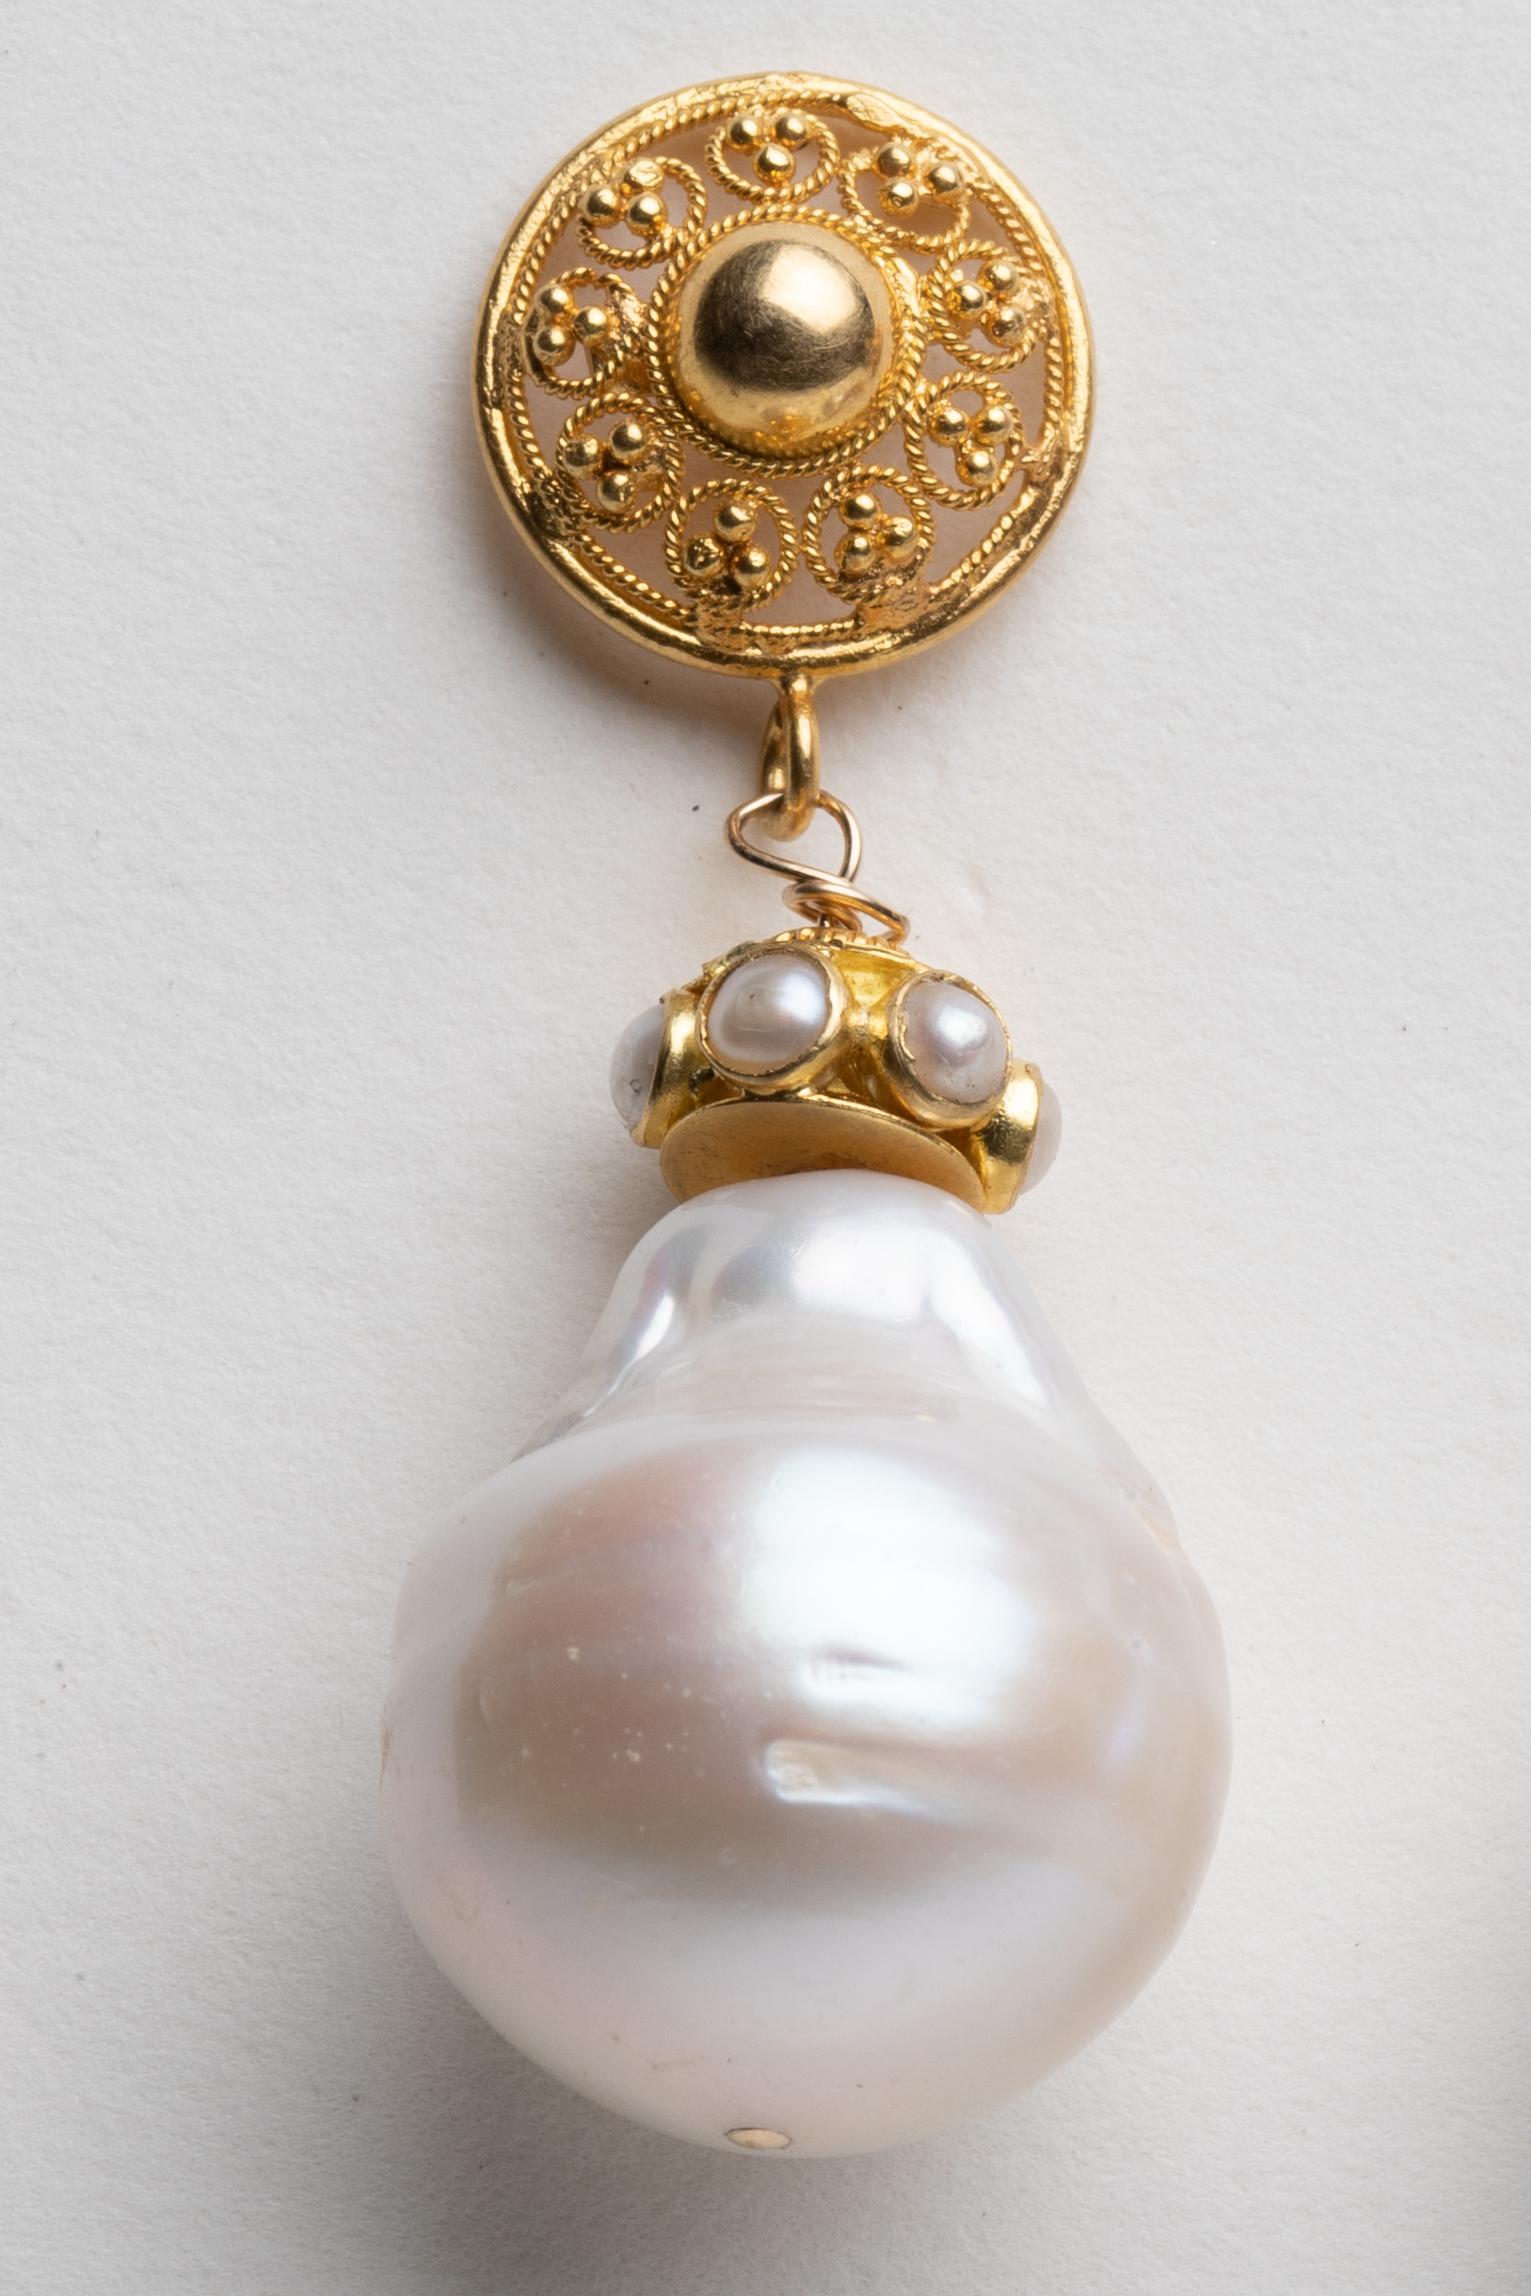 A pair of 22K gold and baroque pearl drop earrings.  Pearls measure 17mm and earrings feature 22K and pearl rondelles and fine tooling and granulation work on the post.  For pierced ears.  By Deborah Lockhart Phillips.